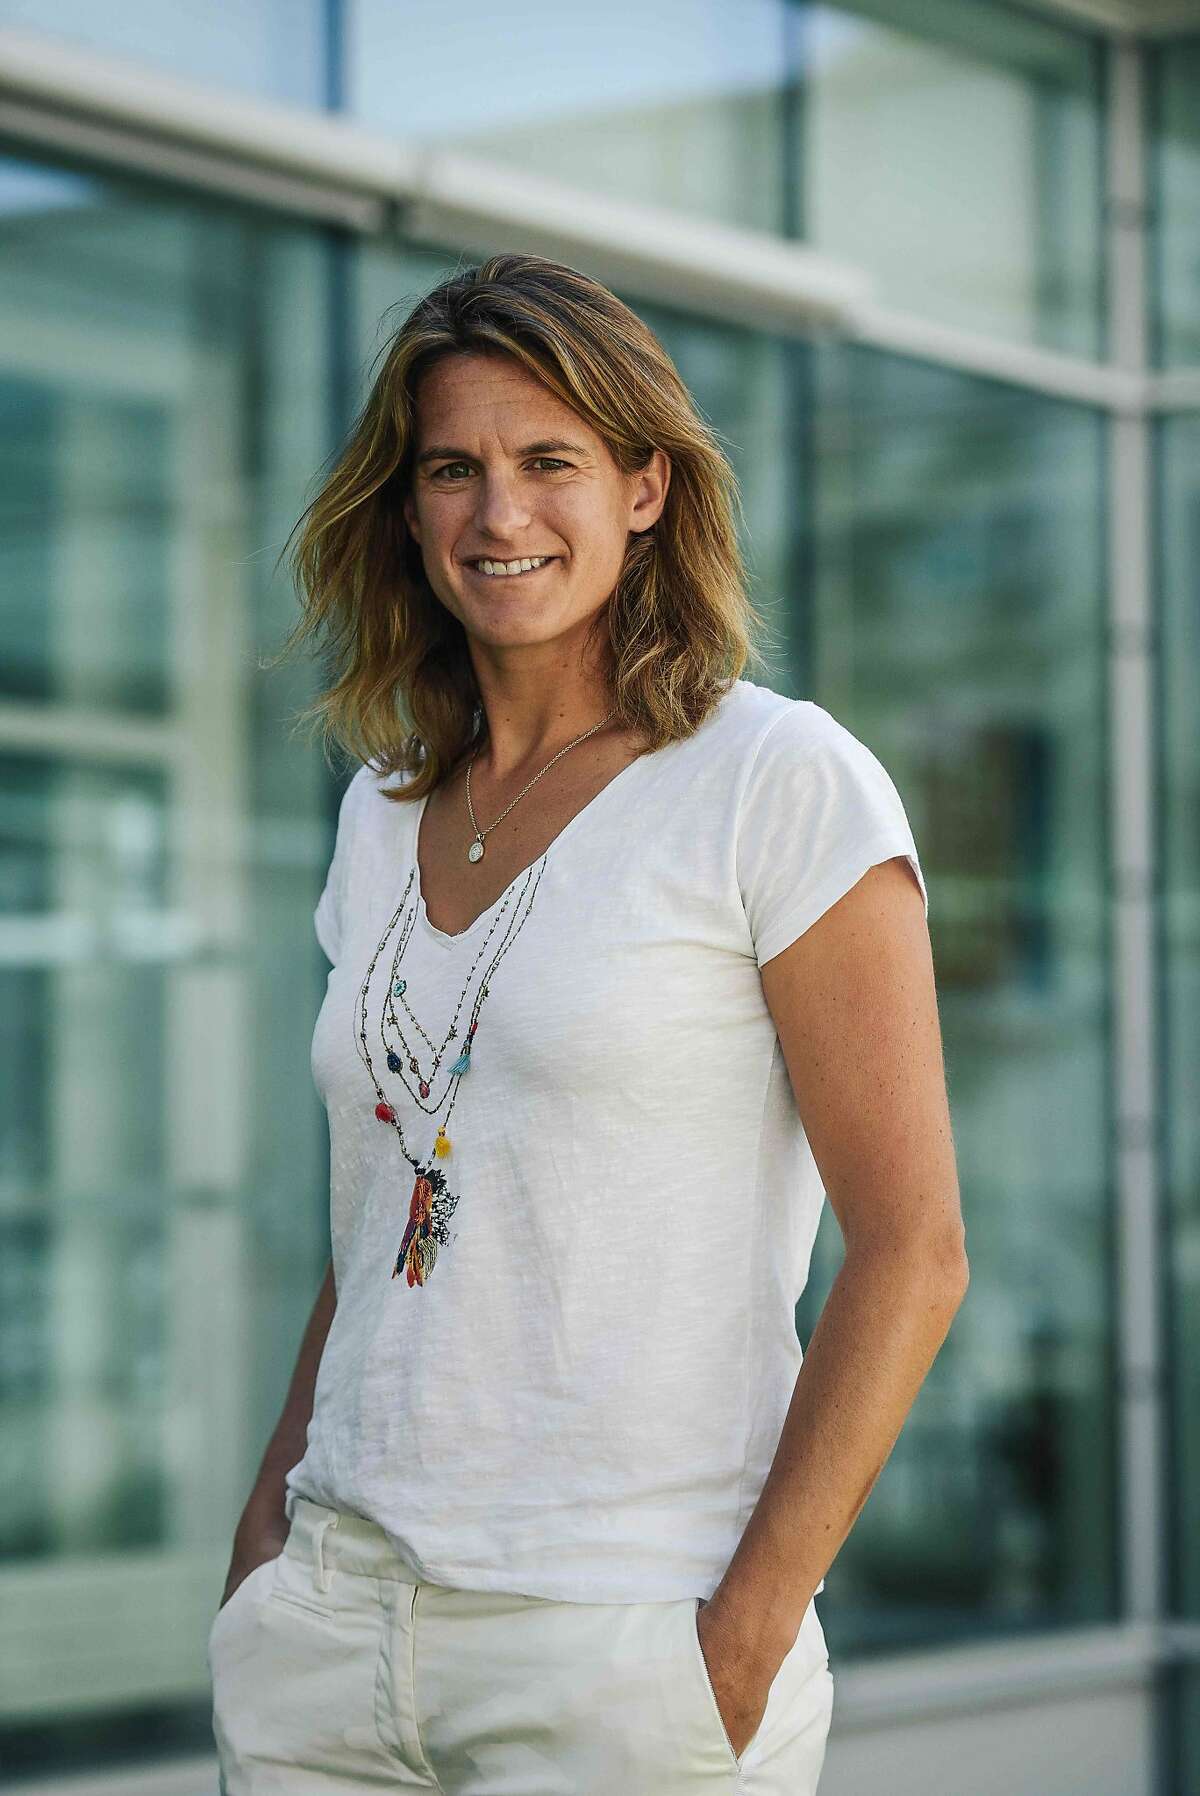 French former world number one Amelie Mauresmo poses following a press conference after she became the first woman appointed to captain France's Davis Cup team by the French tennis federation on June 23, 2018 in Paris. / AFP PHOTO / Lucas BariouletLUCAS BARIOULET/AFP/Getty Images